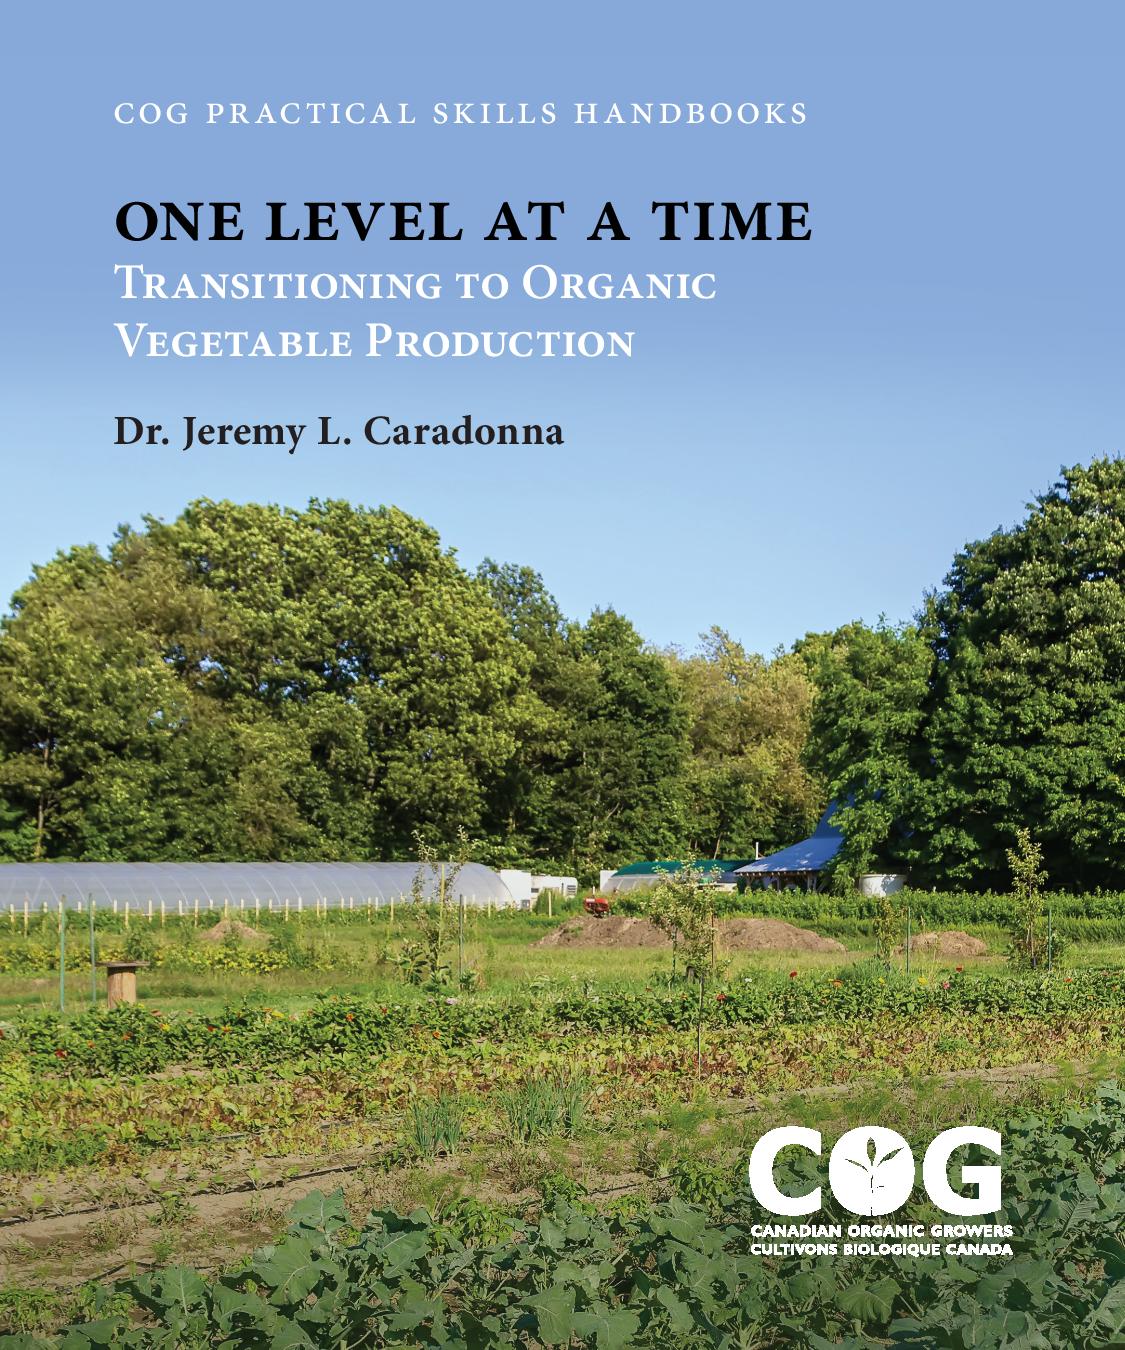 One Level at a Time: Transitioning to Organic Vegetable Production (E-BOOK)